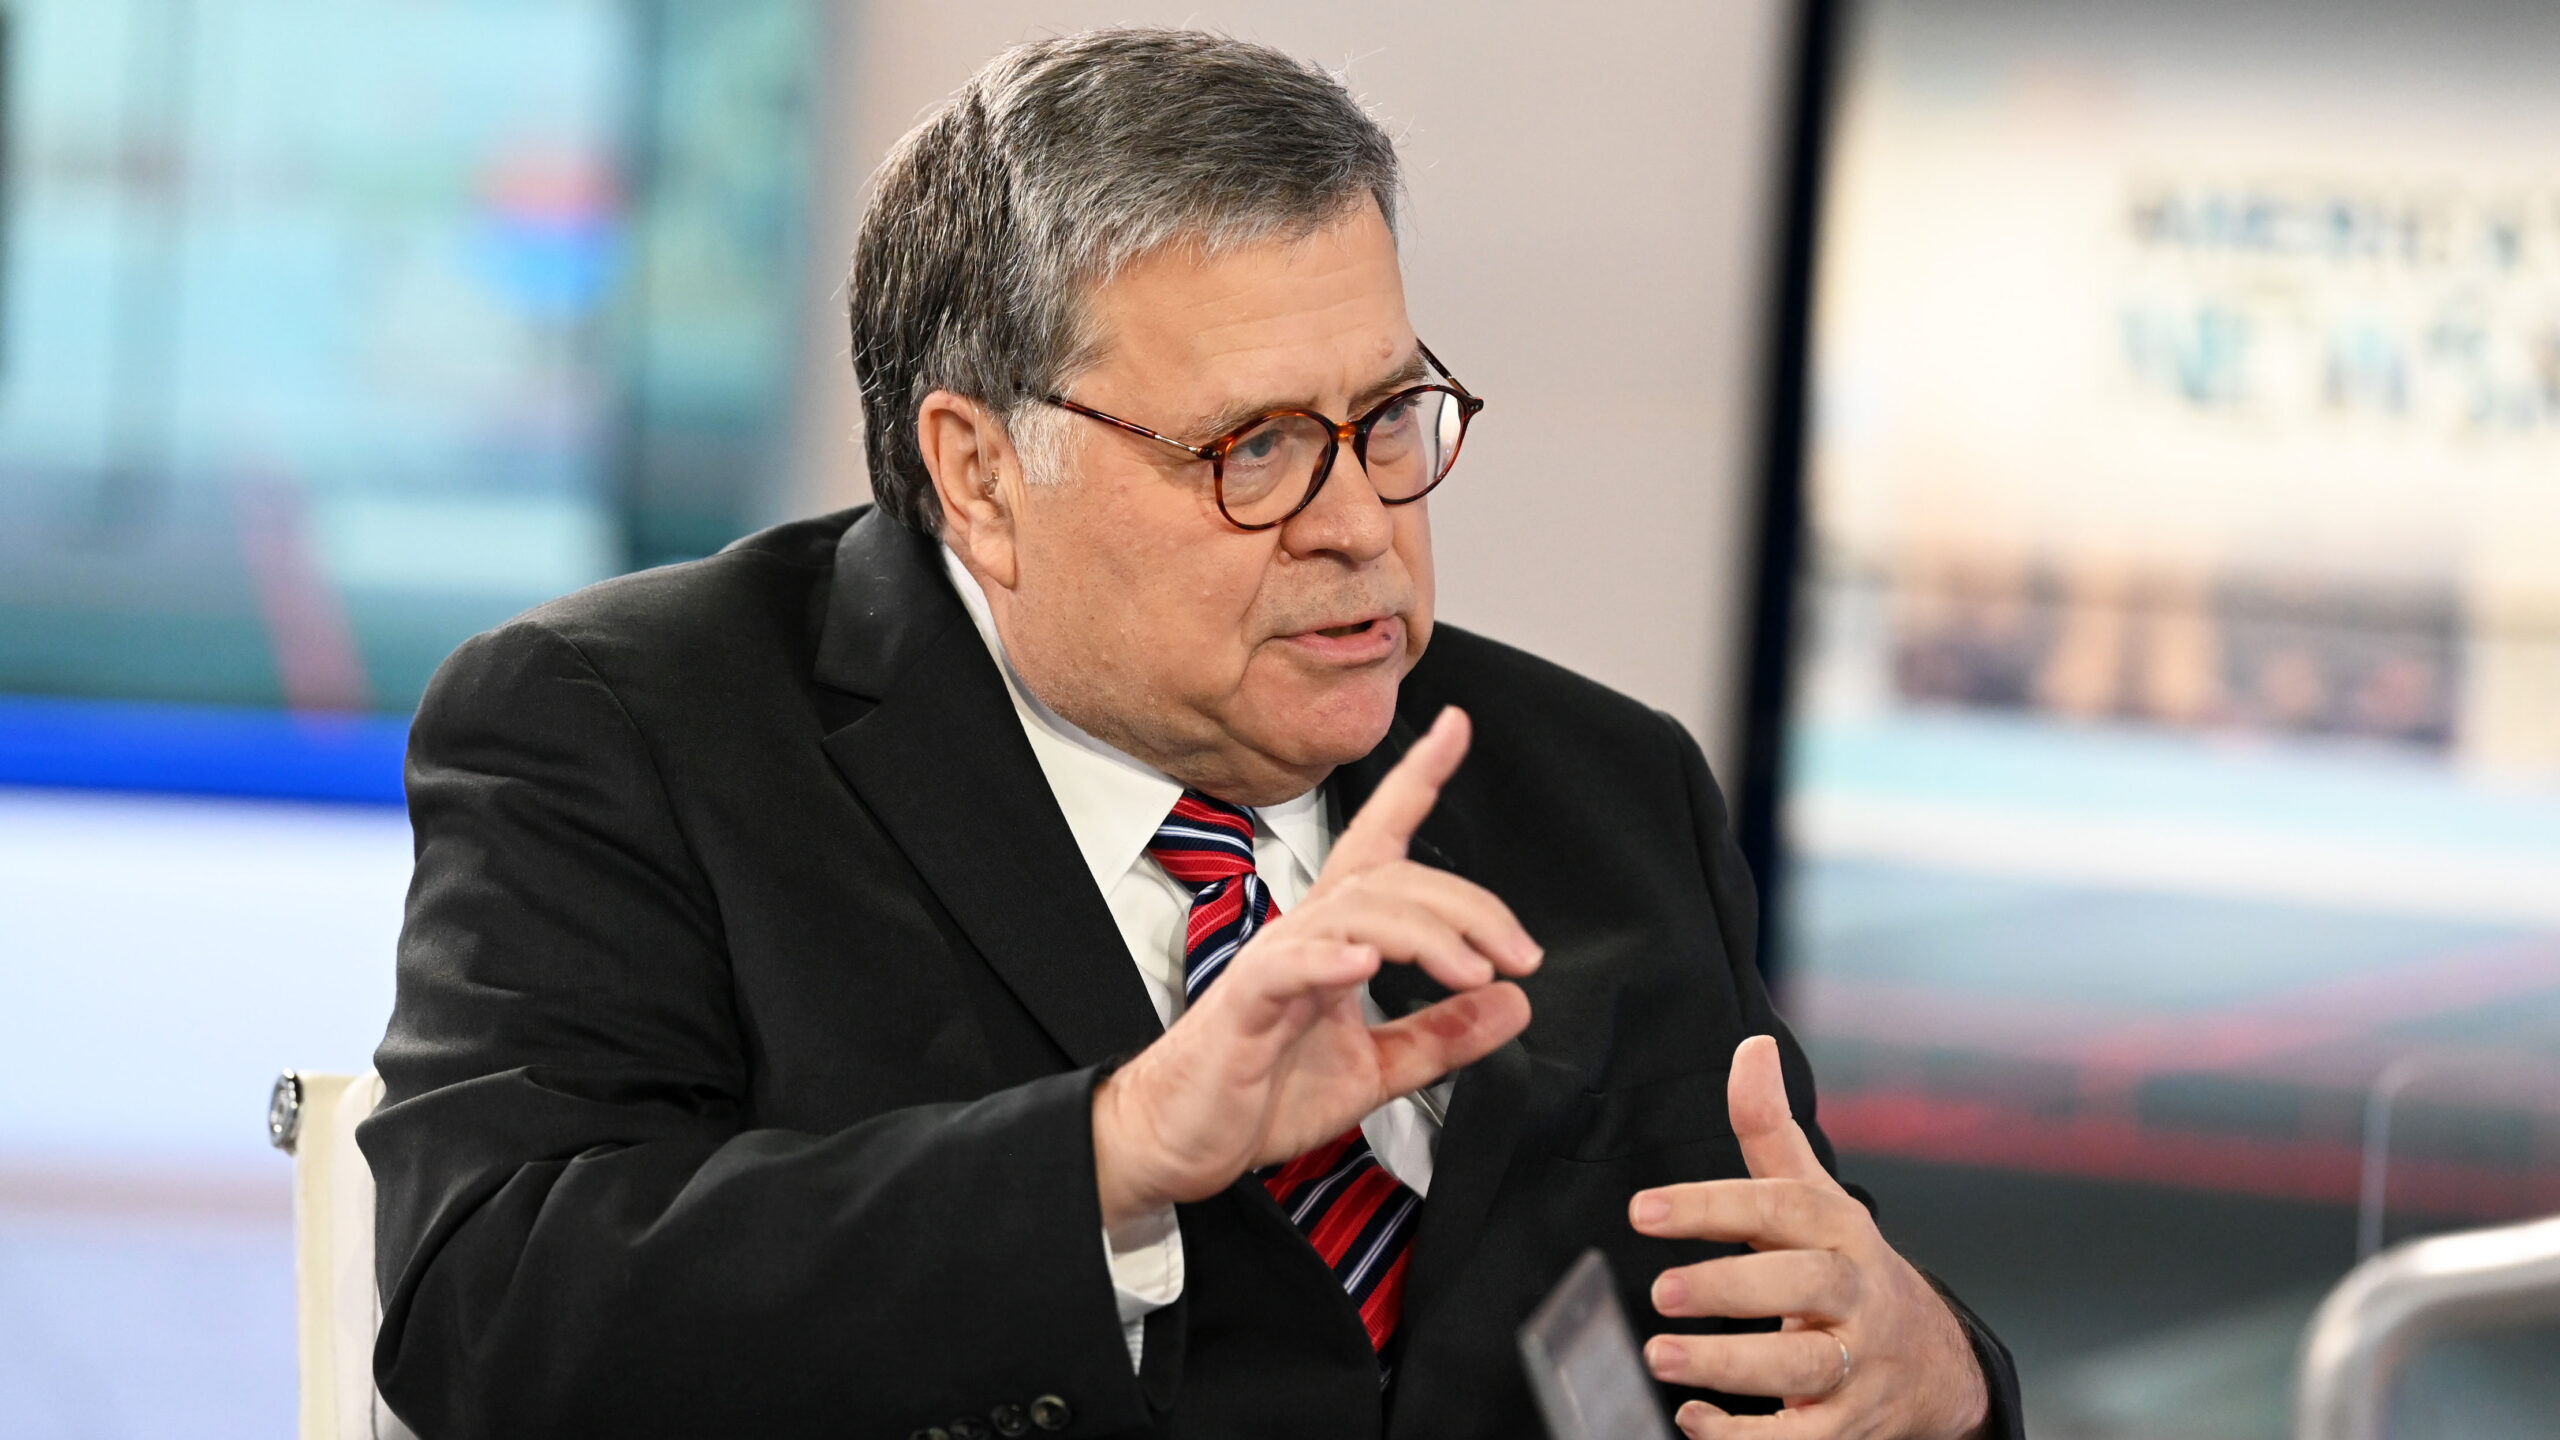 Ex-AG Barr slams Trump: ‘Our nation can’t be a therapy session for a troubled man.’